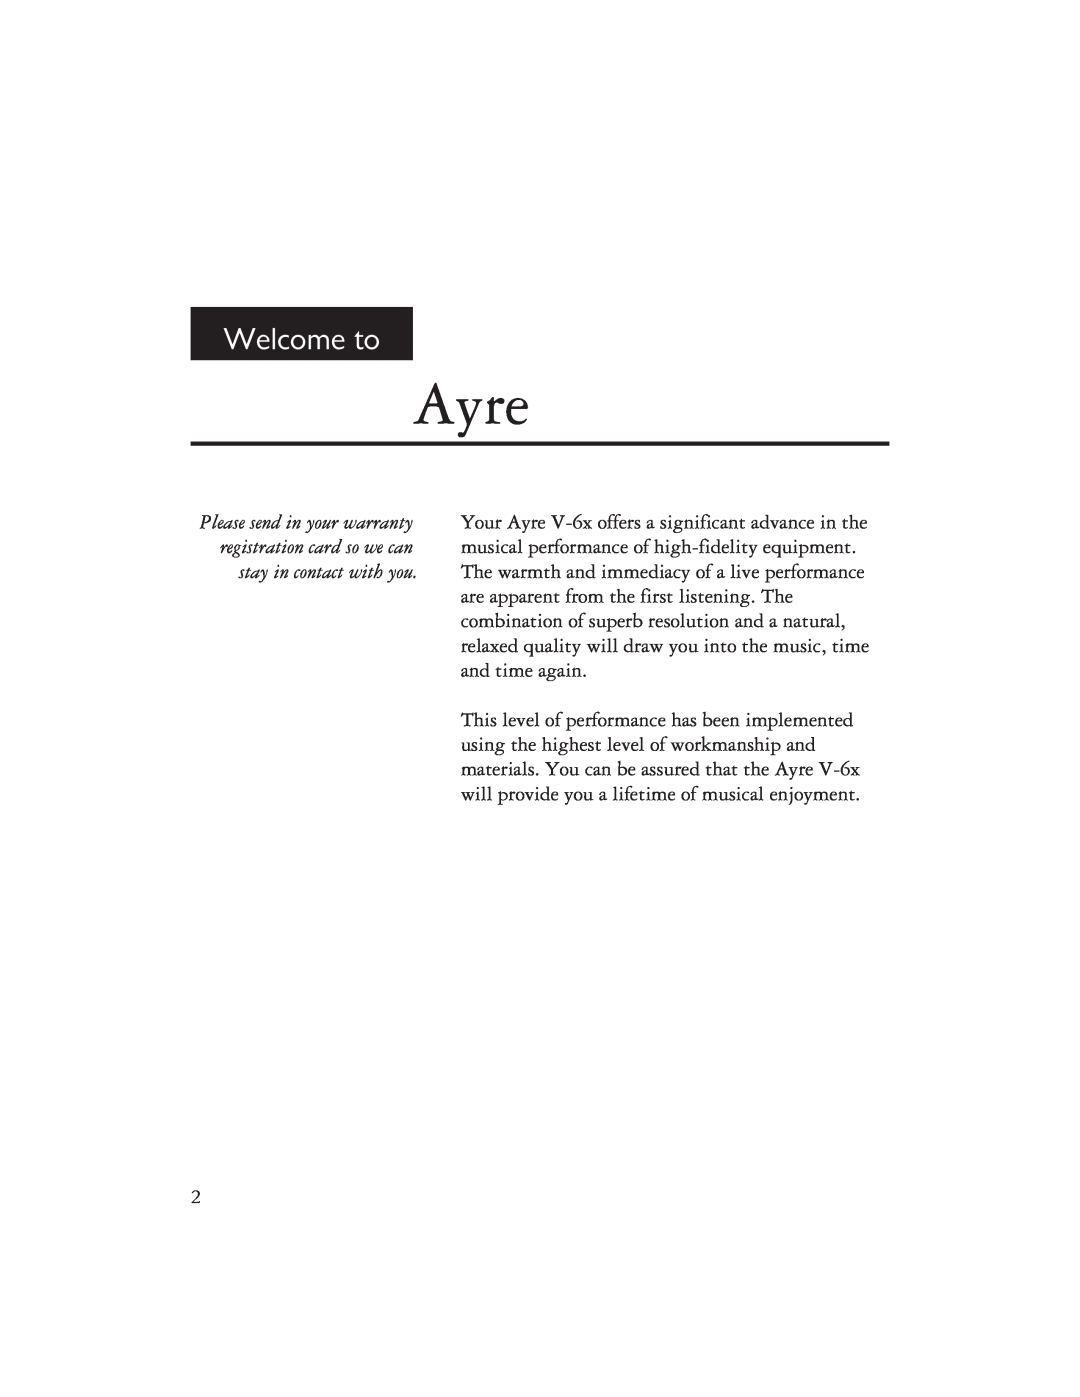 Ayre Acoustics V-6x owner manual Ayre, Welcome to 